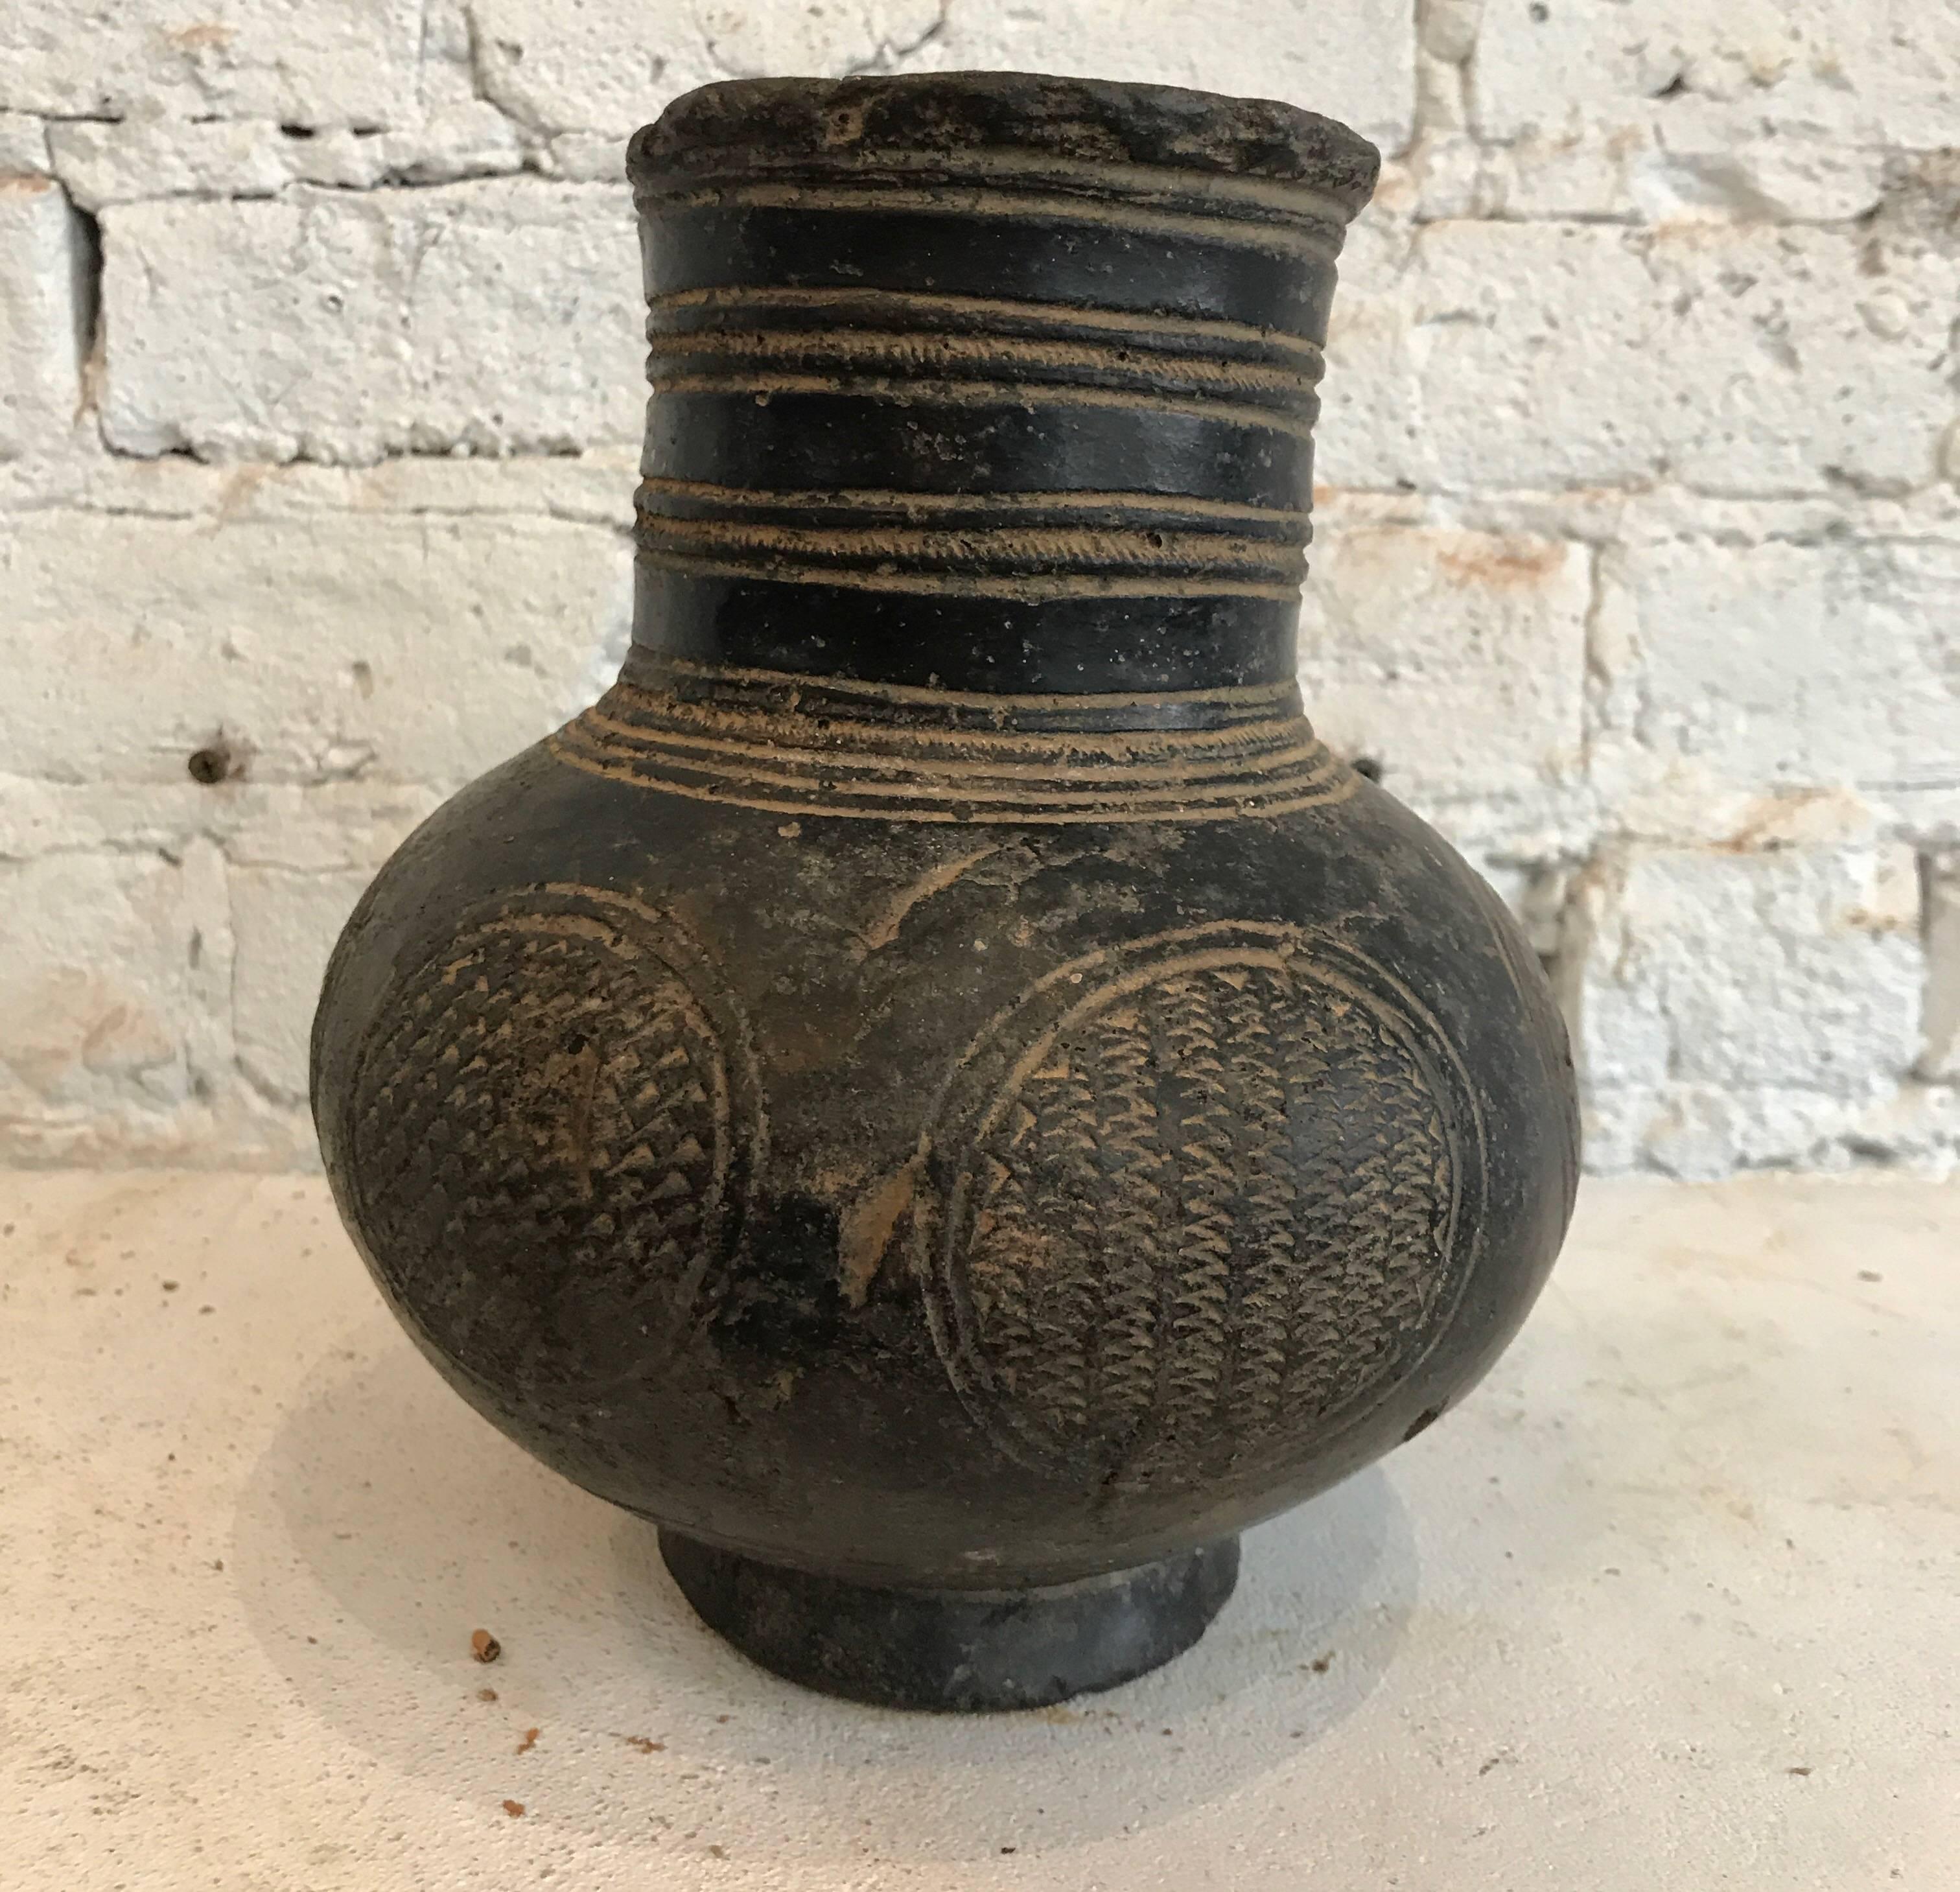 Mid-20th century engraved African vessel from Mali




Dimensions: 7.5 in. H x 6.25 in. diameter. Neck of vase is 3.25 in. H x 3.75 in. diam at opening. 
The base of vase has 3.25 in. diameter.